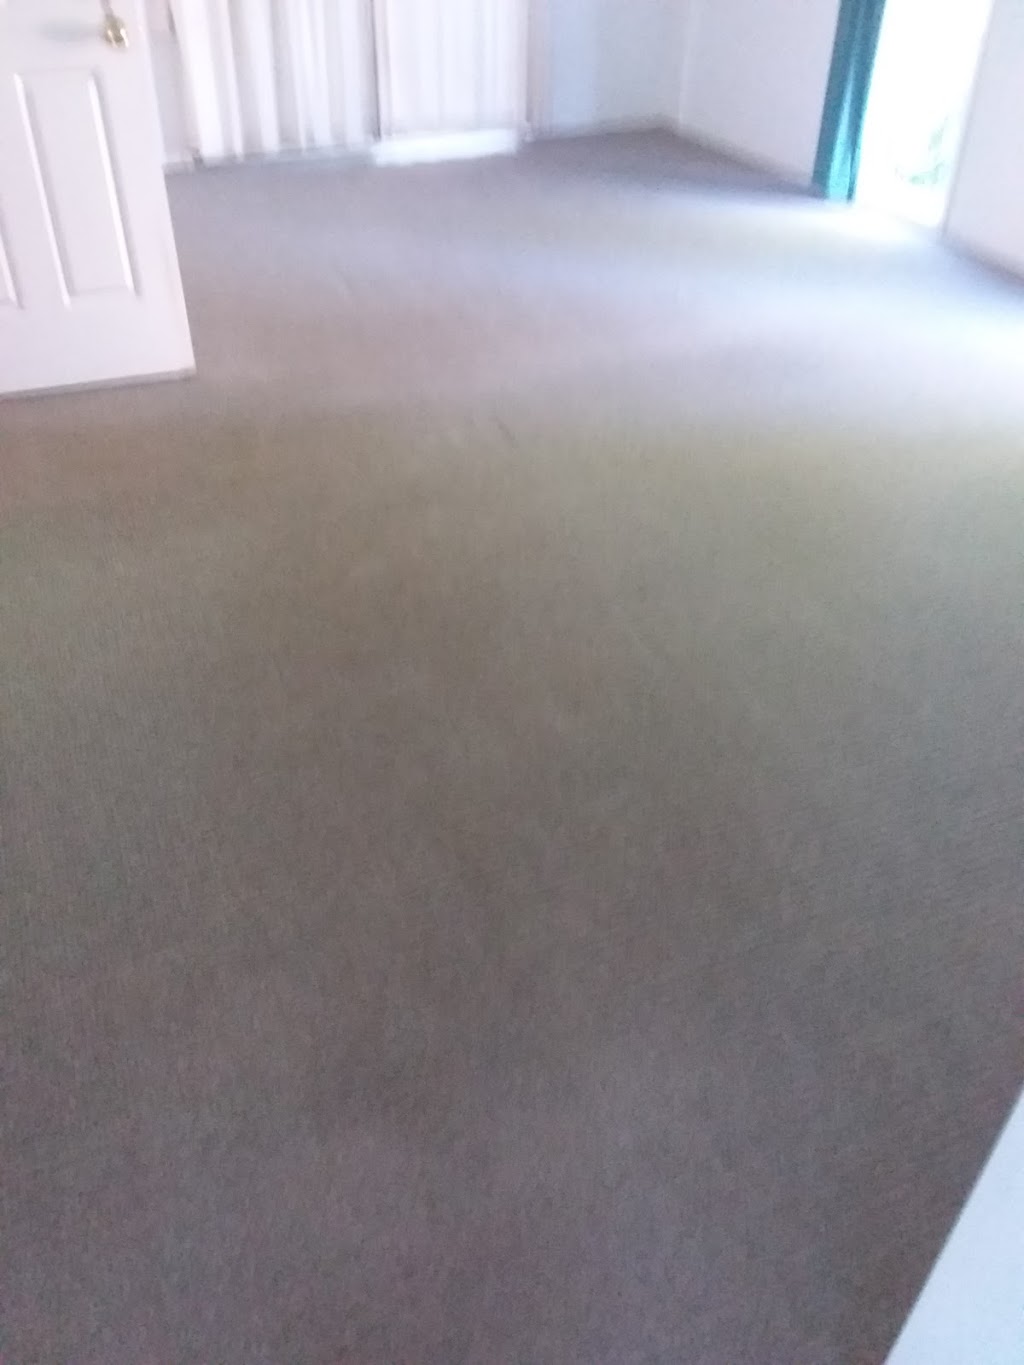 All Carpet Cleansing | laundry | 26 Pecan Dr, Upper Coomera QLD 4209, Australia | 0432238088 OR +61 432 238 088